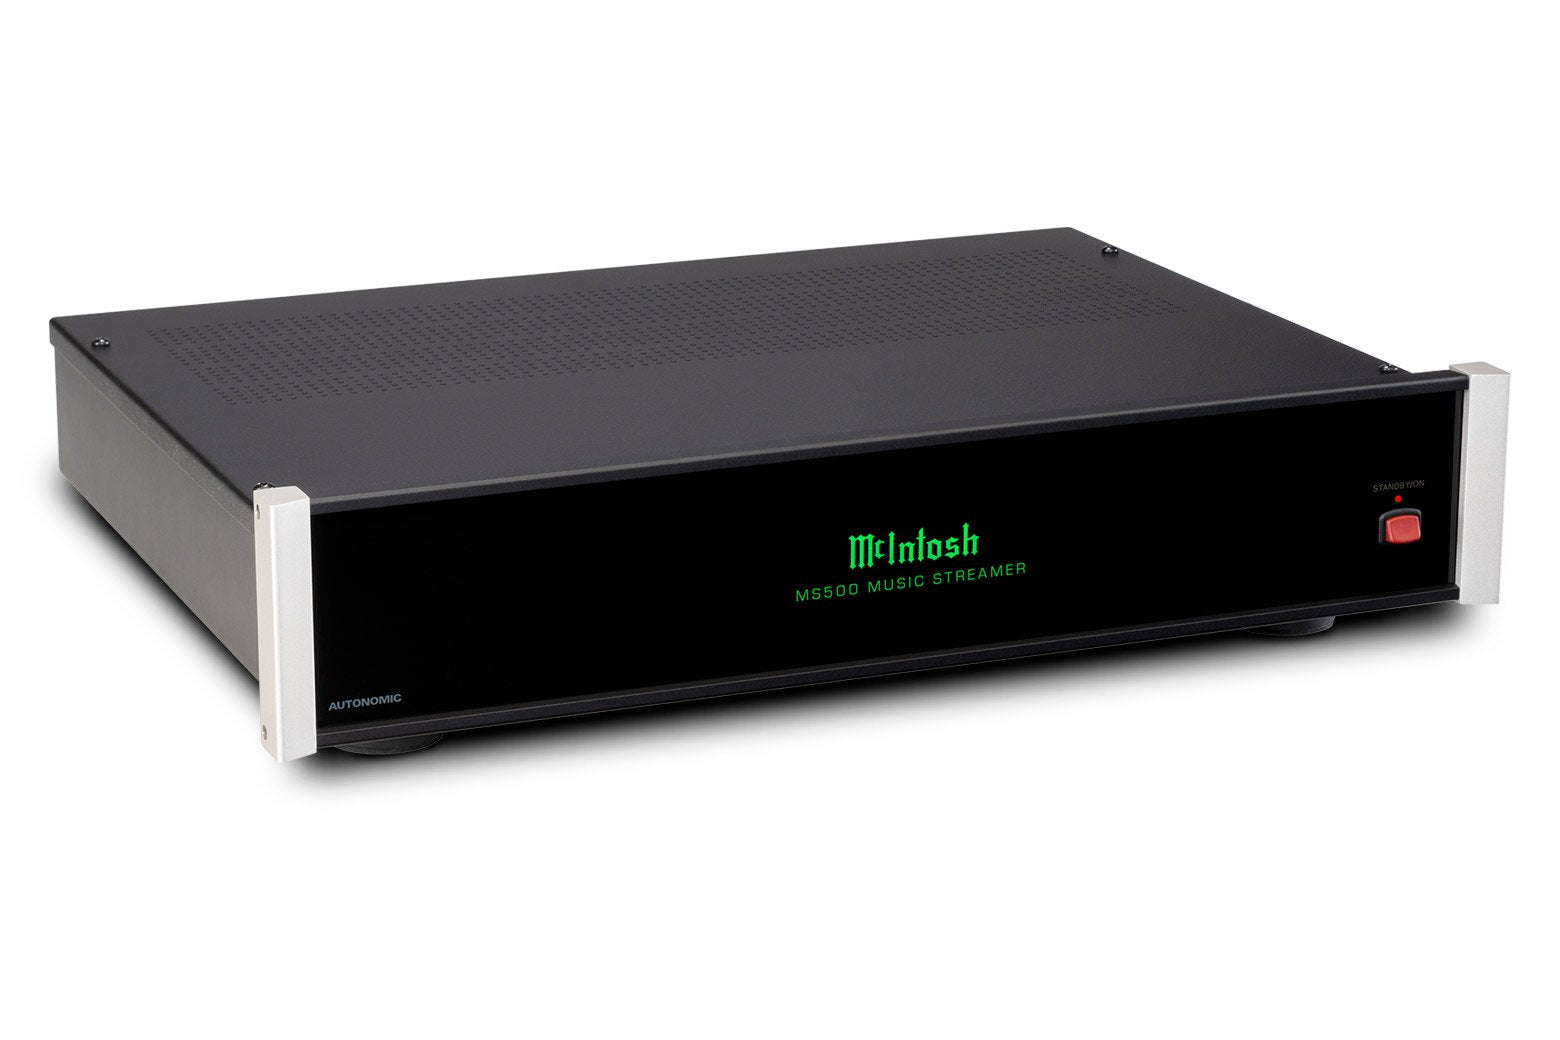 McIntosh MS500 Music Streamer (In-Store Purchases Only & USD Pricing)